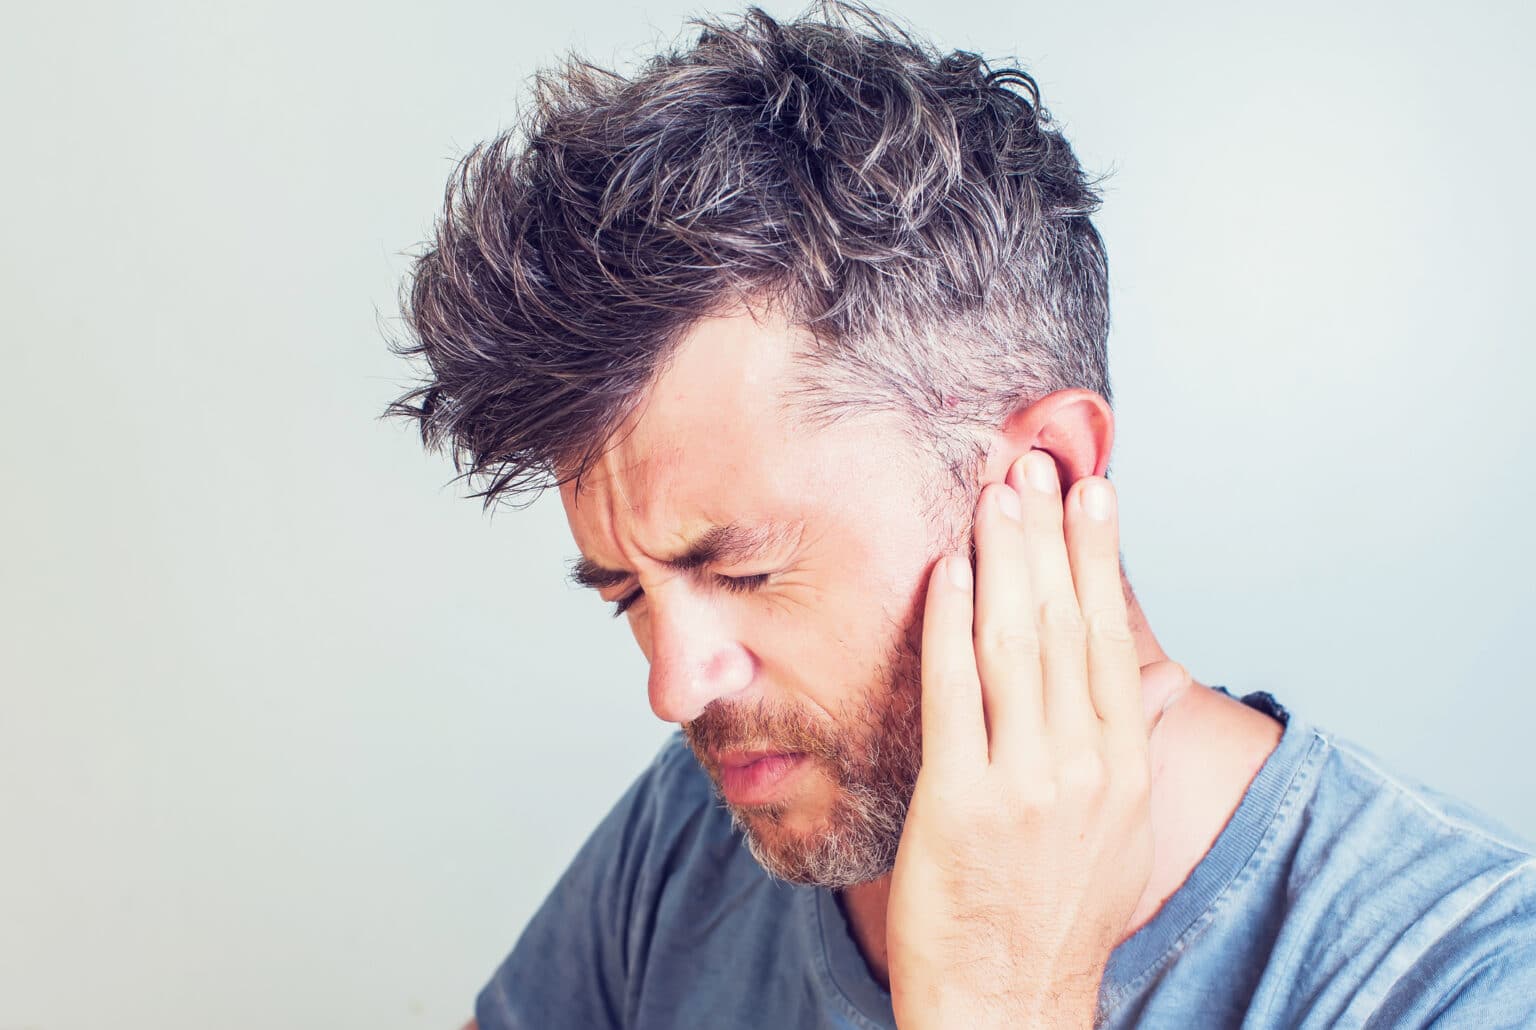 Man with tinnitus pressing his ear with his hand.